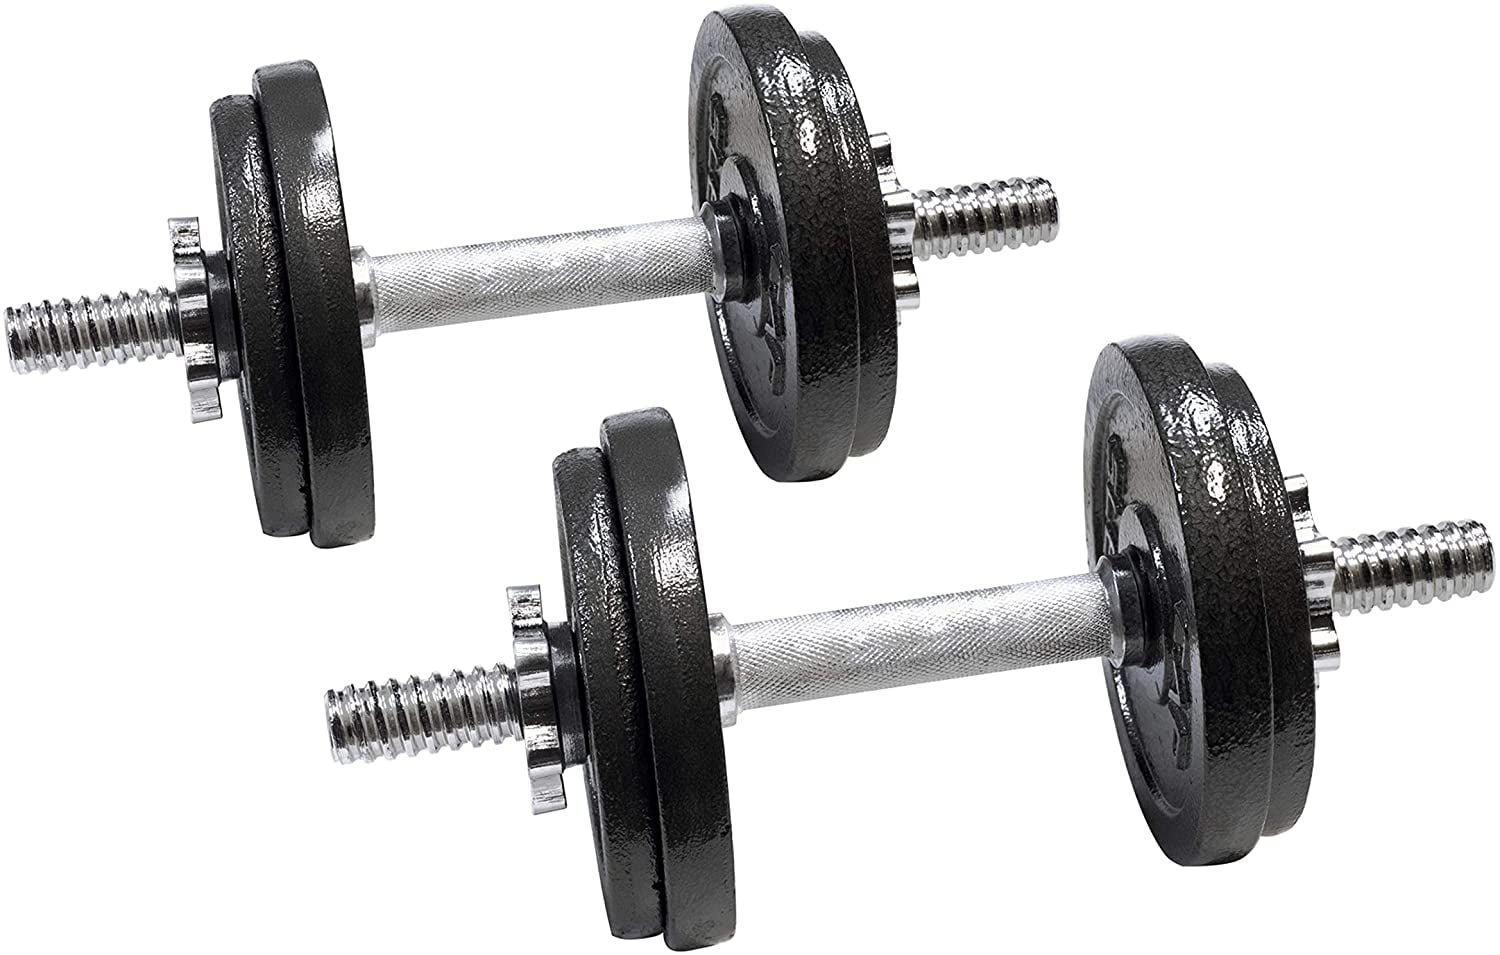 BRAND NEW CAP BARBELL 40-POUND ADJUSTABLE VINYL DUMBBELL WEIGHT SET IN HAND 40LB 